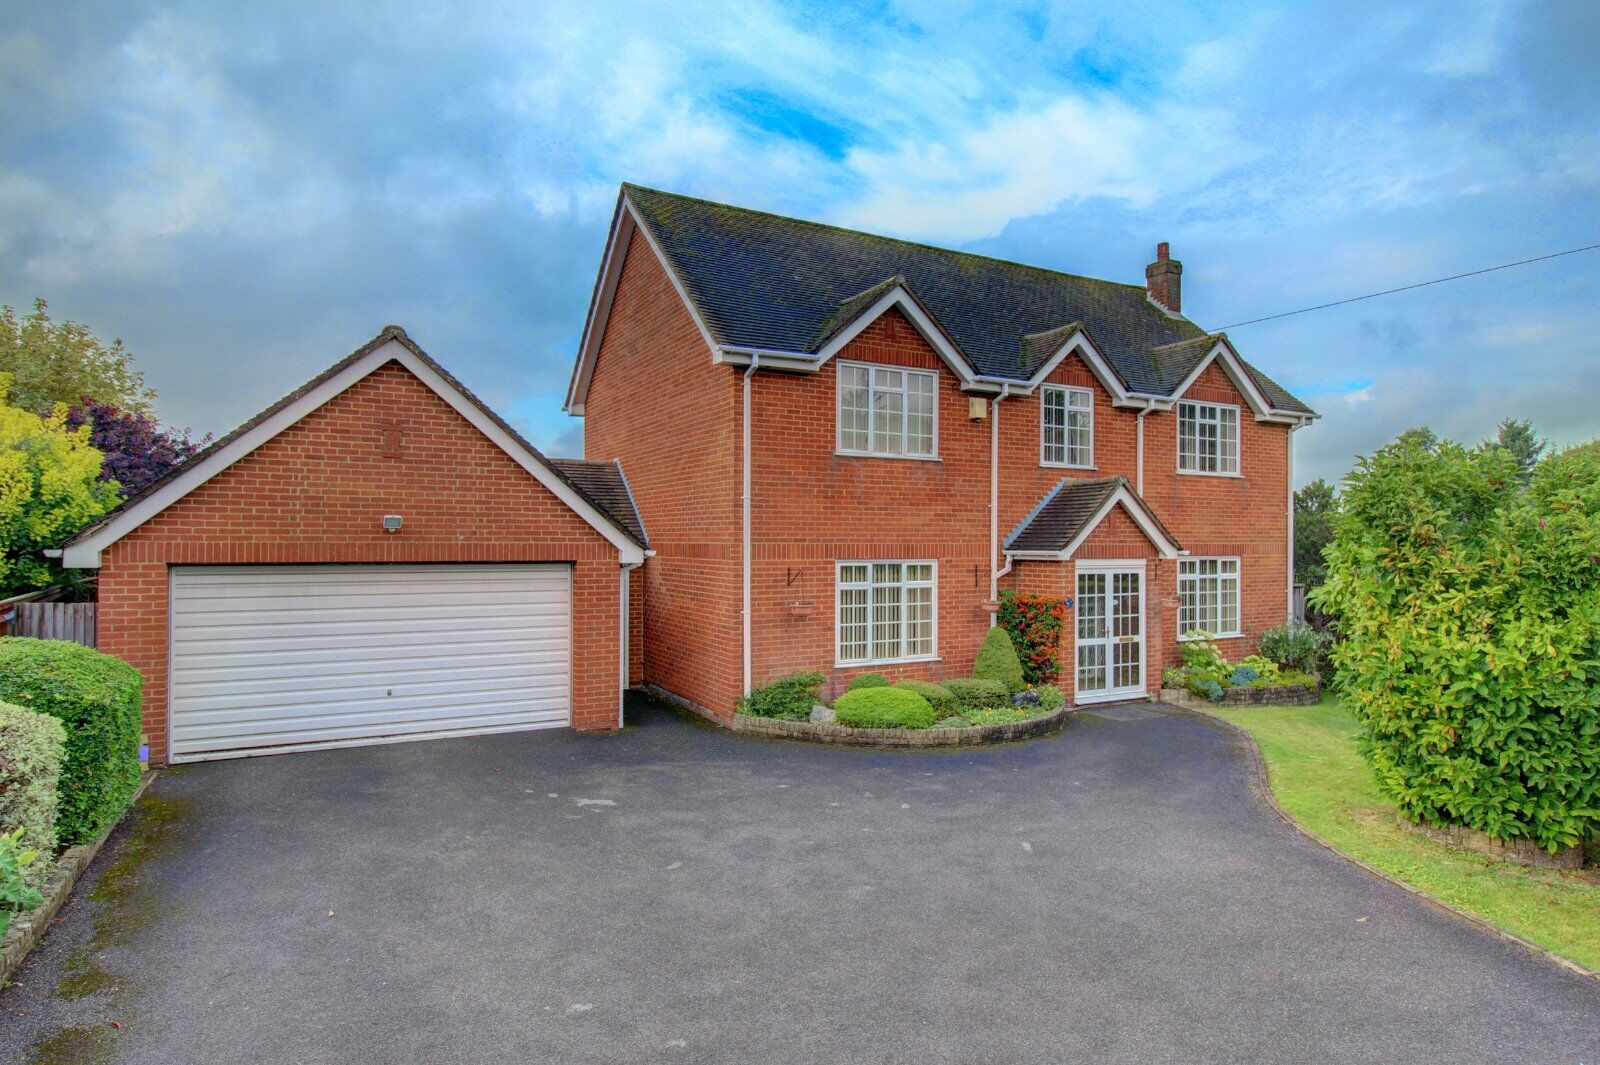 4 bedroom detached house for sale Marlow Road, High Wycombe, HP11, main image